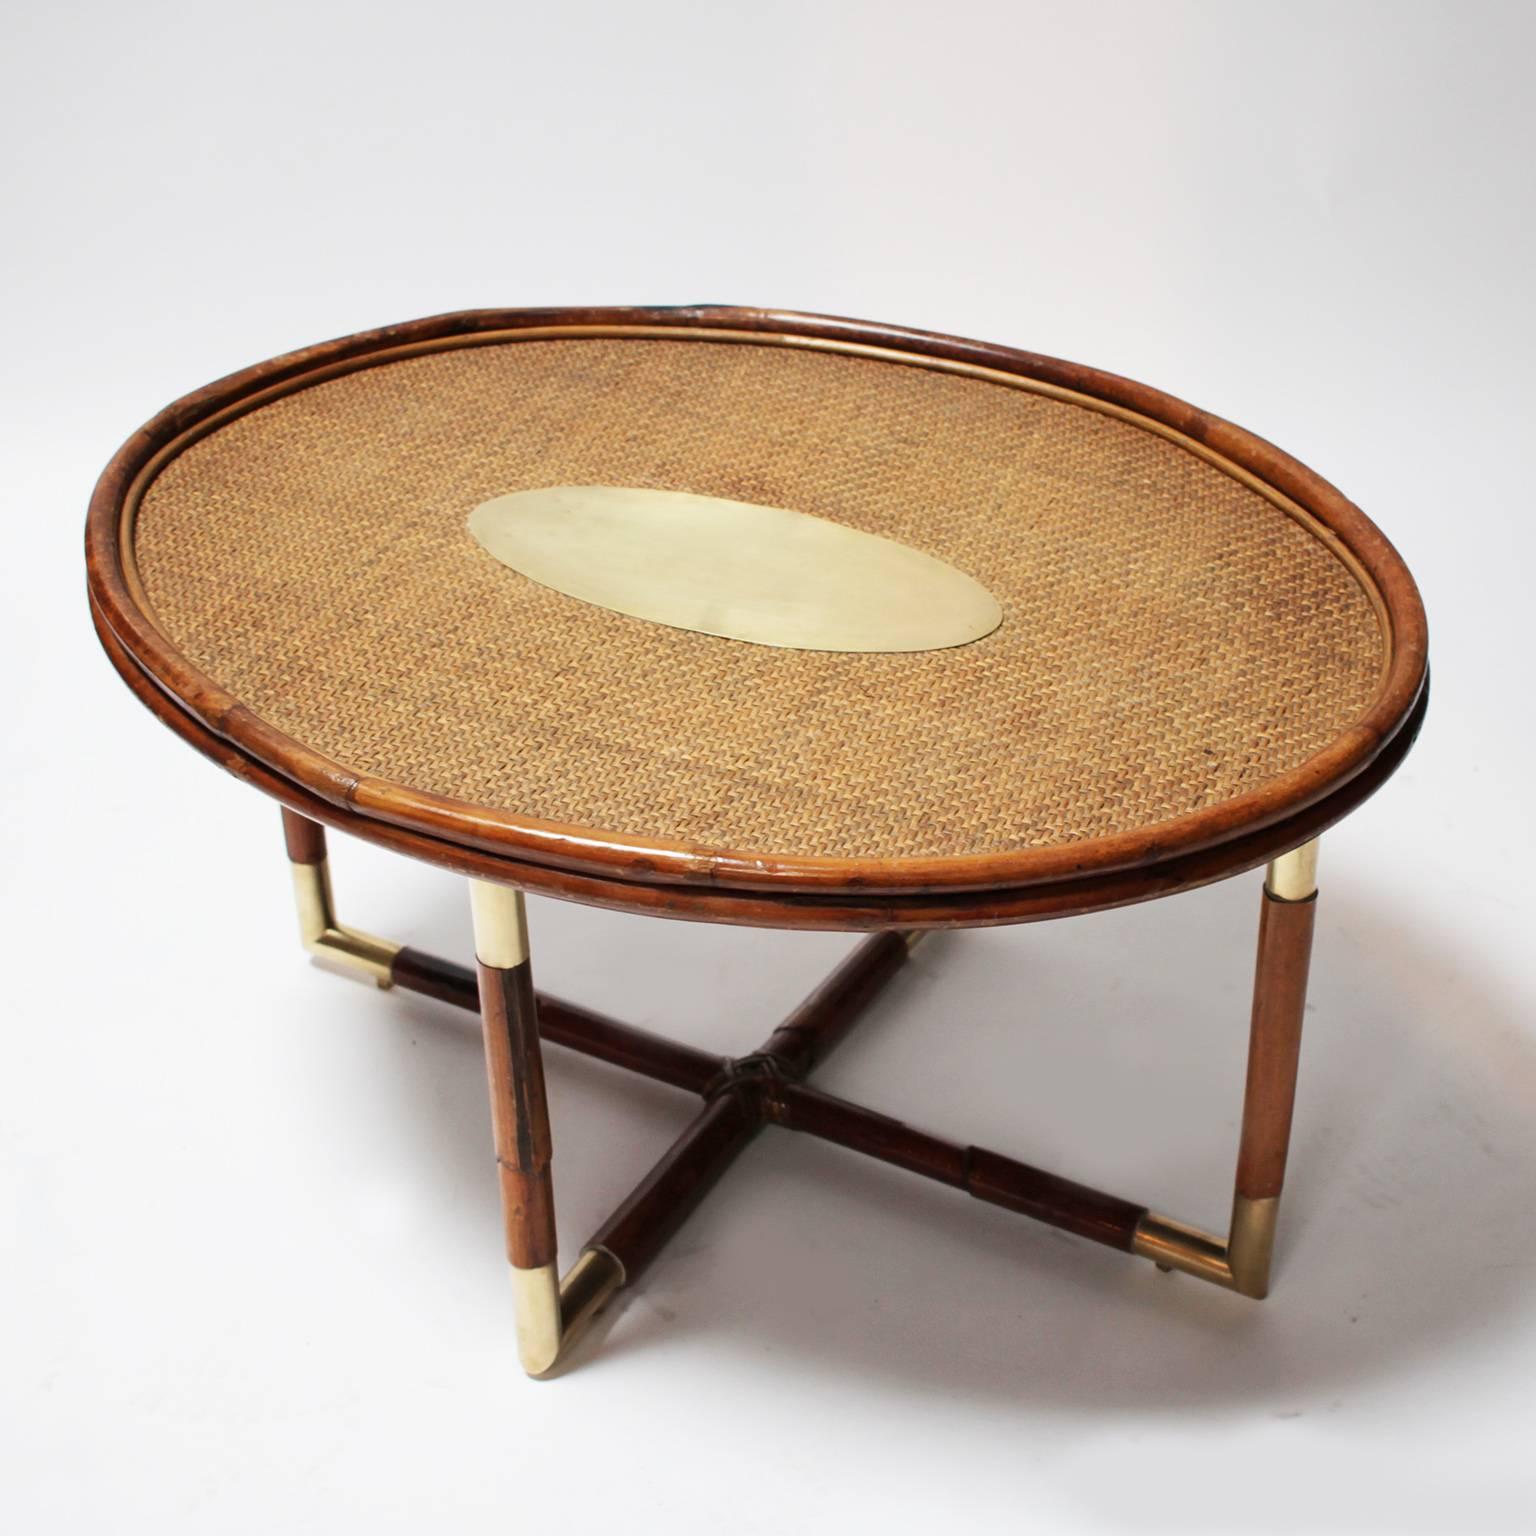 Elegant bamboo coffee table in the style of Gabriella Crespi.
Tabletop in woven bamboo with a polished brass ovoïdal center,
bamboo legs with brass junctions and details.